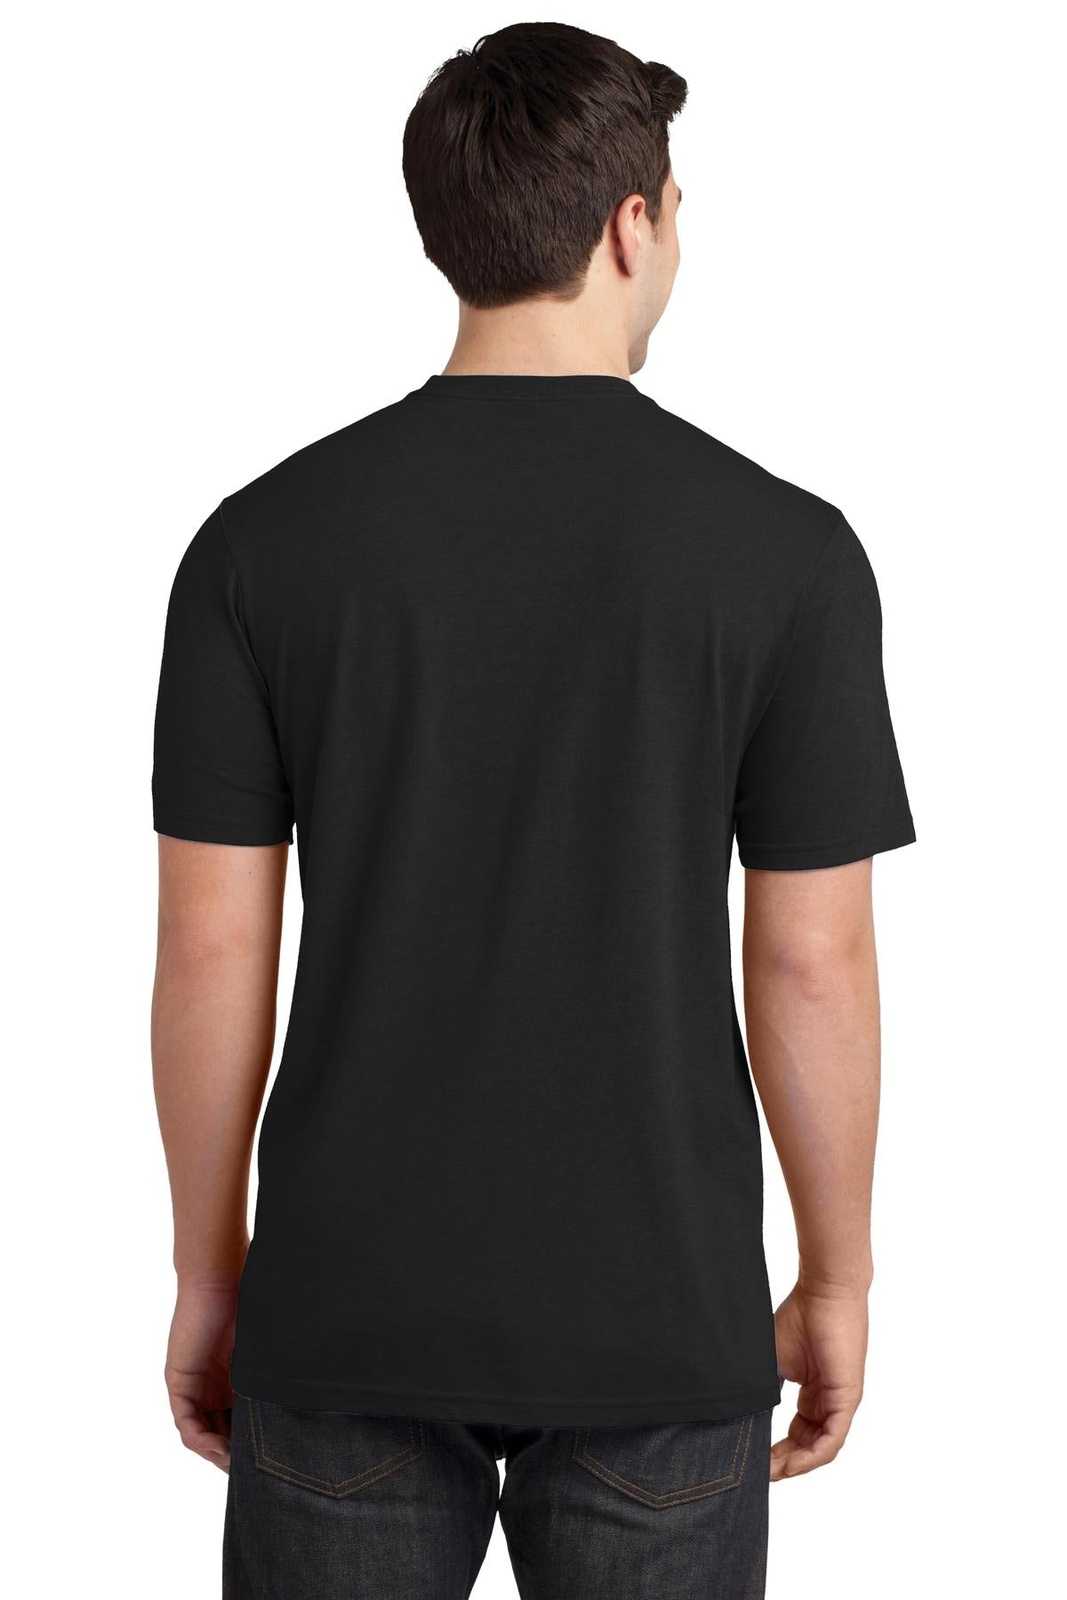 District DT6000P Very Important Tee with Pocket - Black - HIT a Double - 2